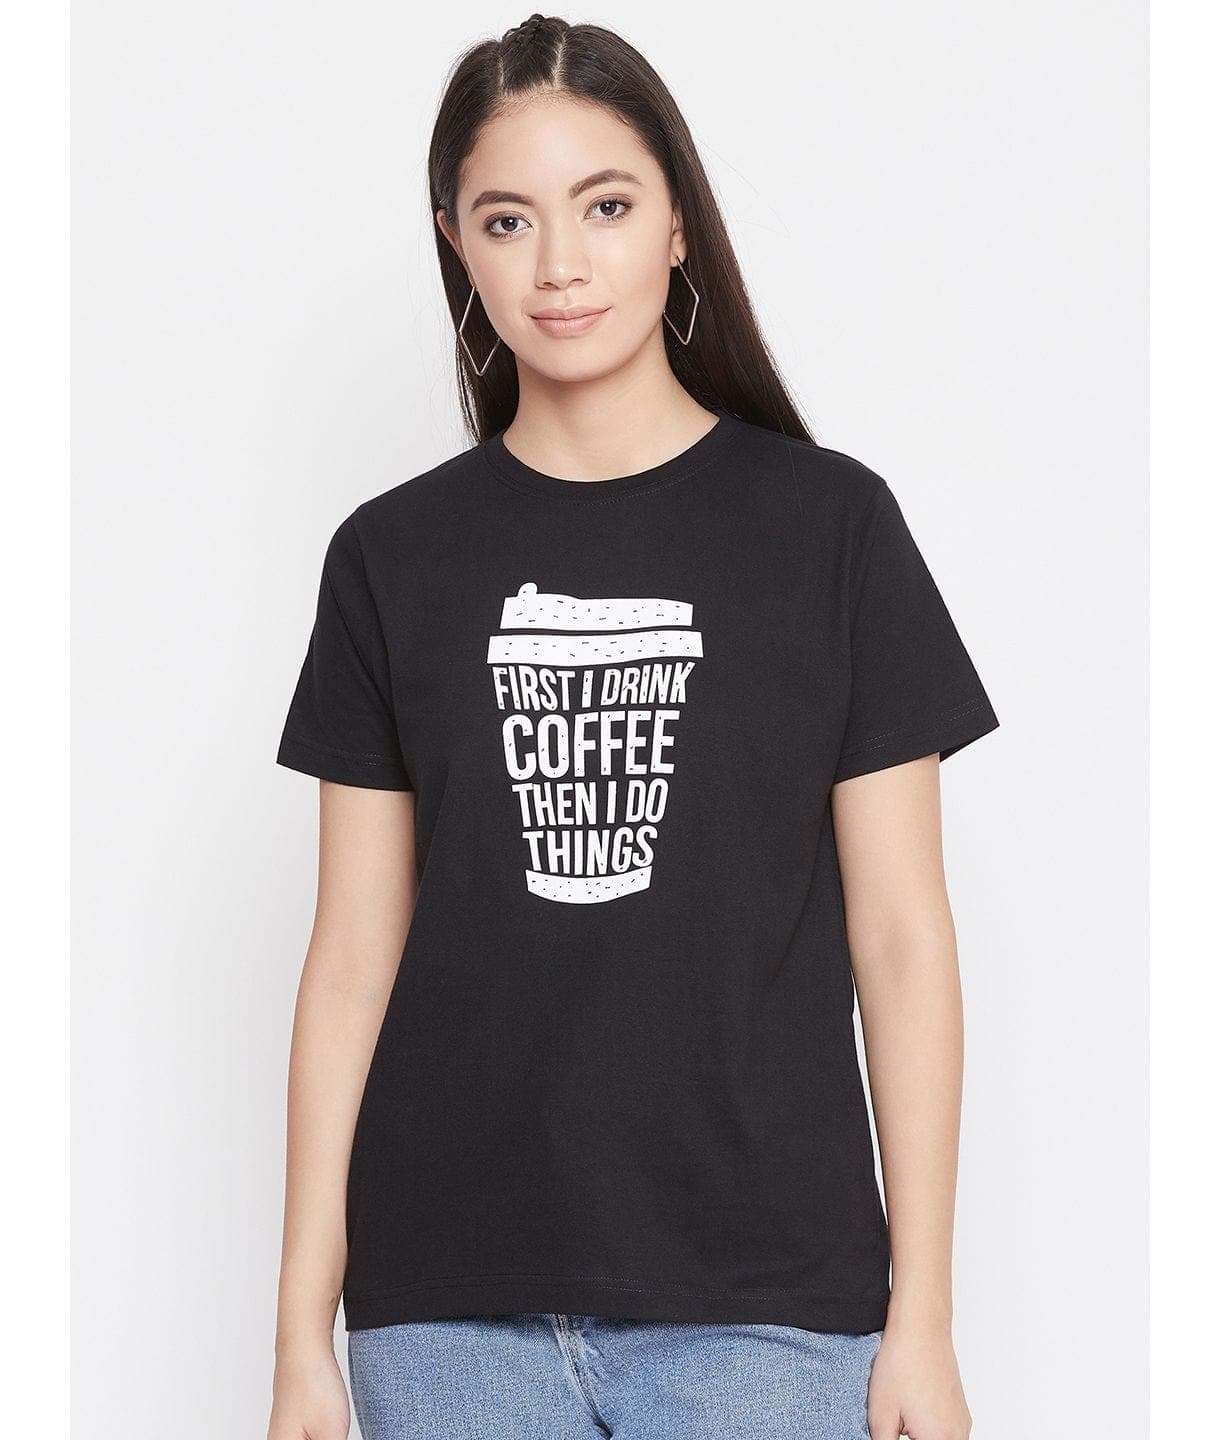 First I Drink Coffee Graphic Cotton T-shirt - Uptownie